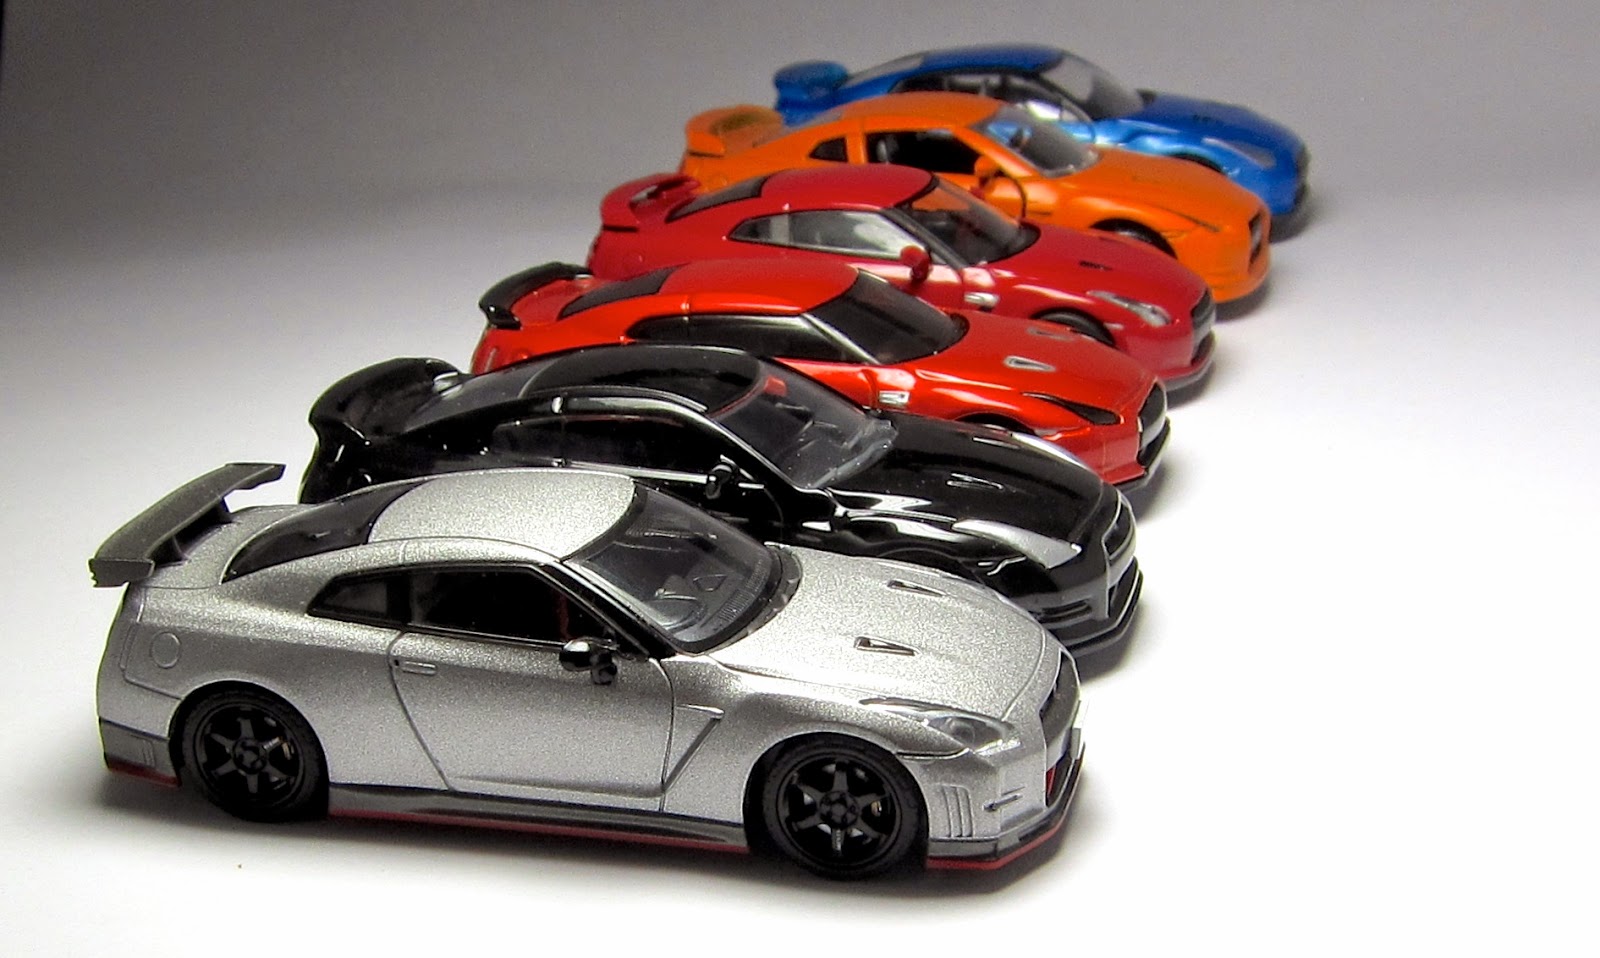 Find many great new & used options and get the best deals for hot wheel...